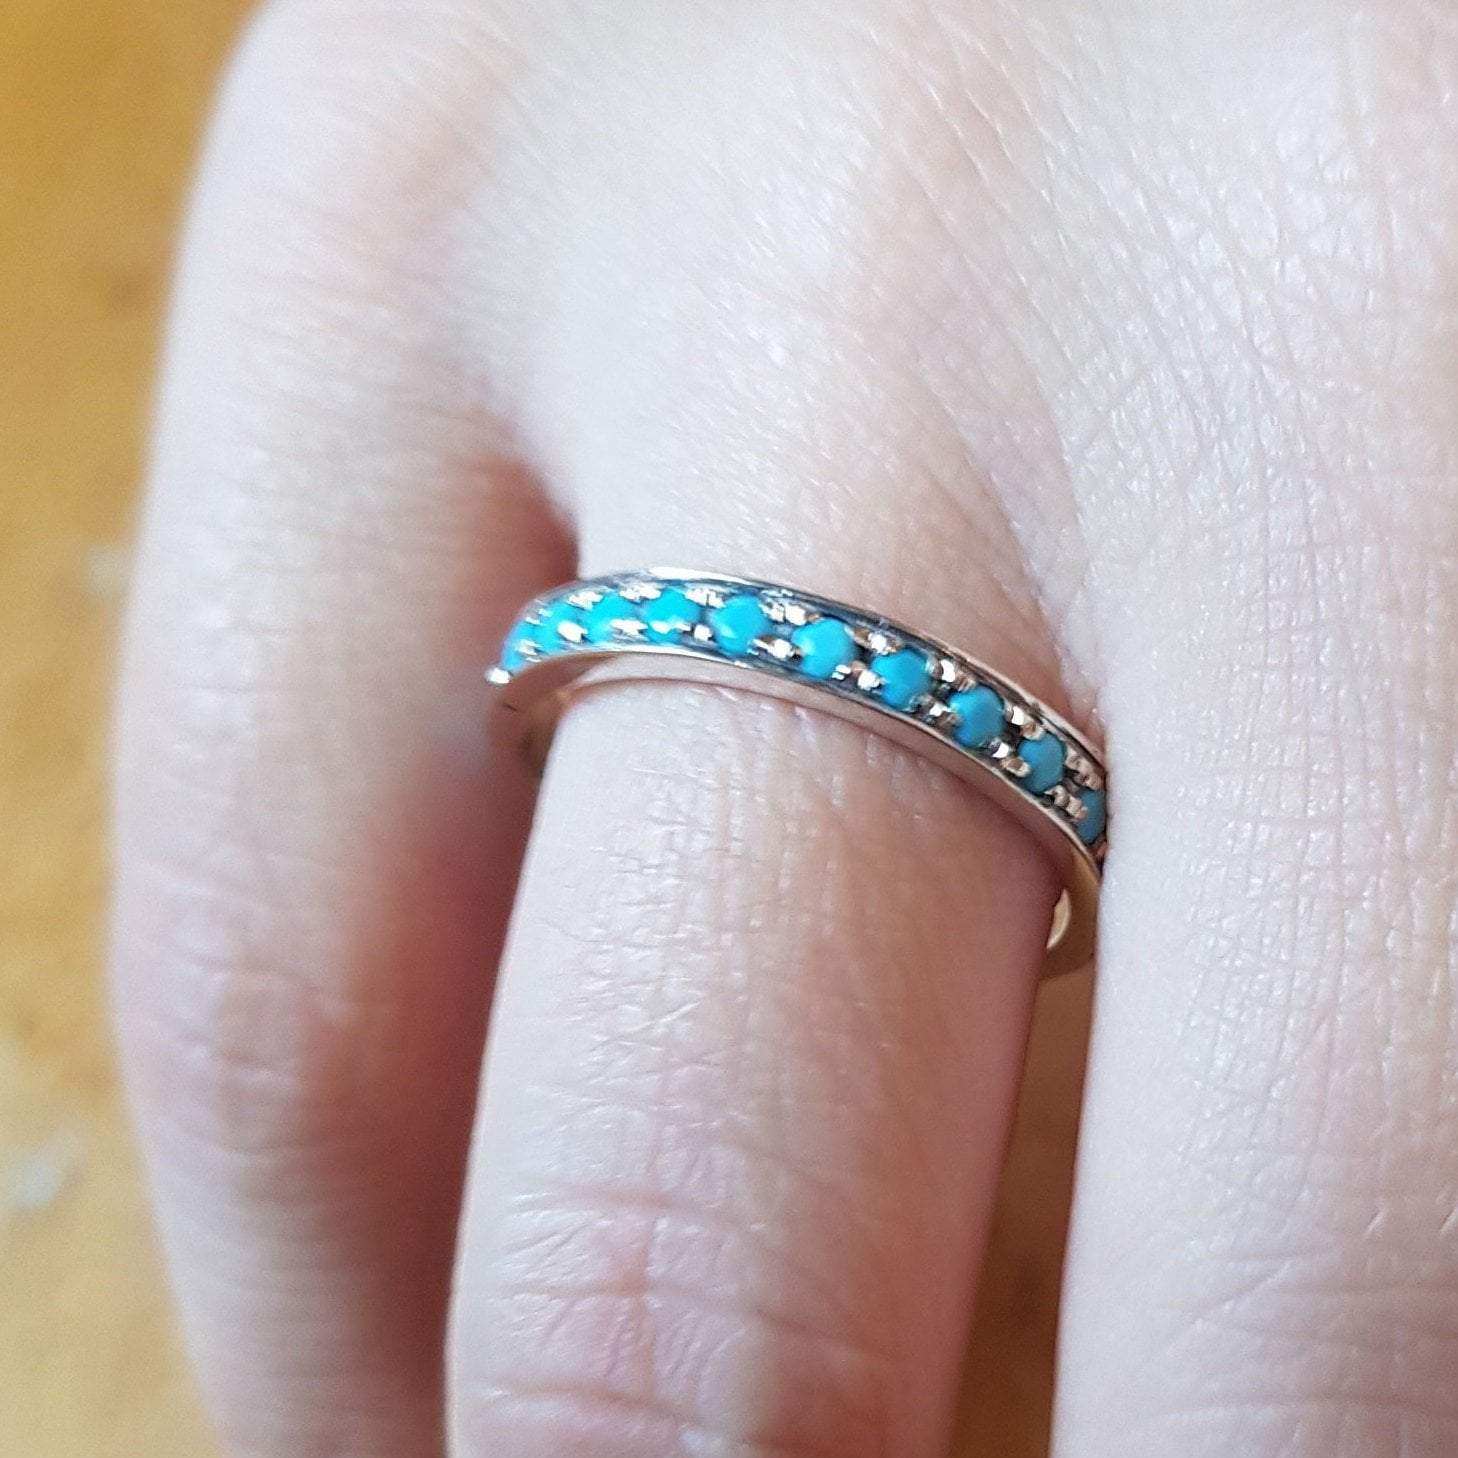 Bluenoemi Jewelry womens rings, rings for women, stacking ring, blue opals ring, delicate jewelry, sterling band ring for woman